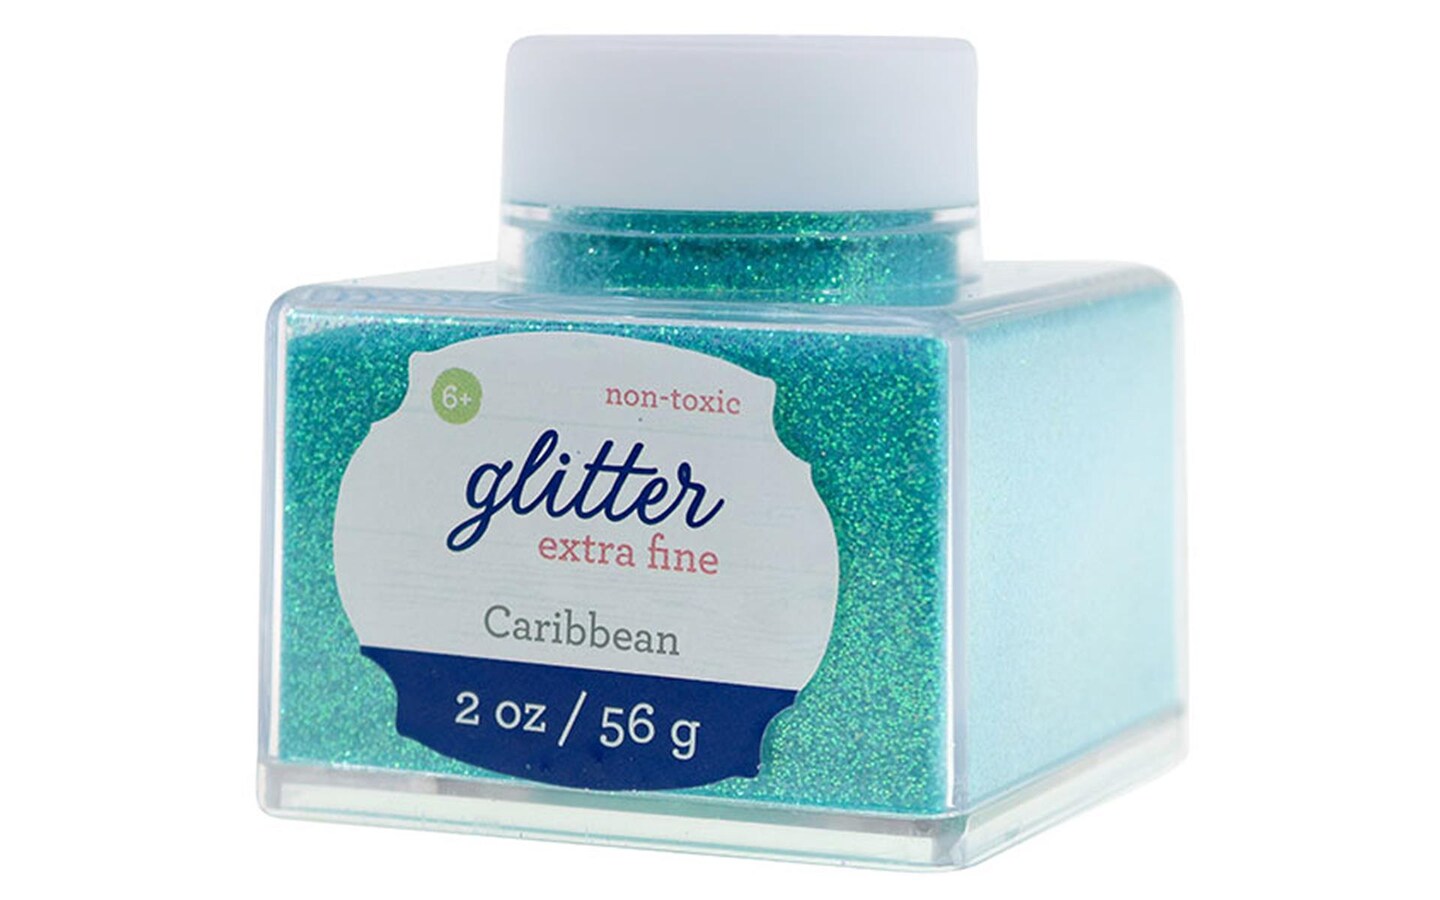 Sulyn Extra Fine Glitter Caribbean 2.5 oz Container Lot of 2 Free Shipping